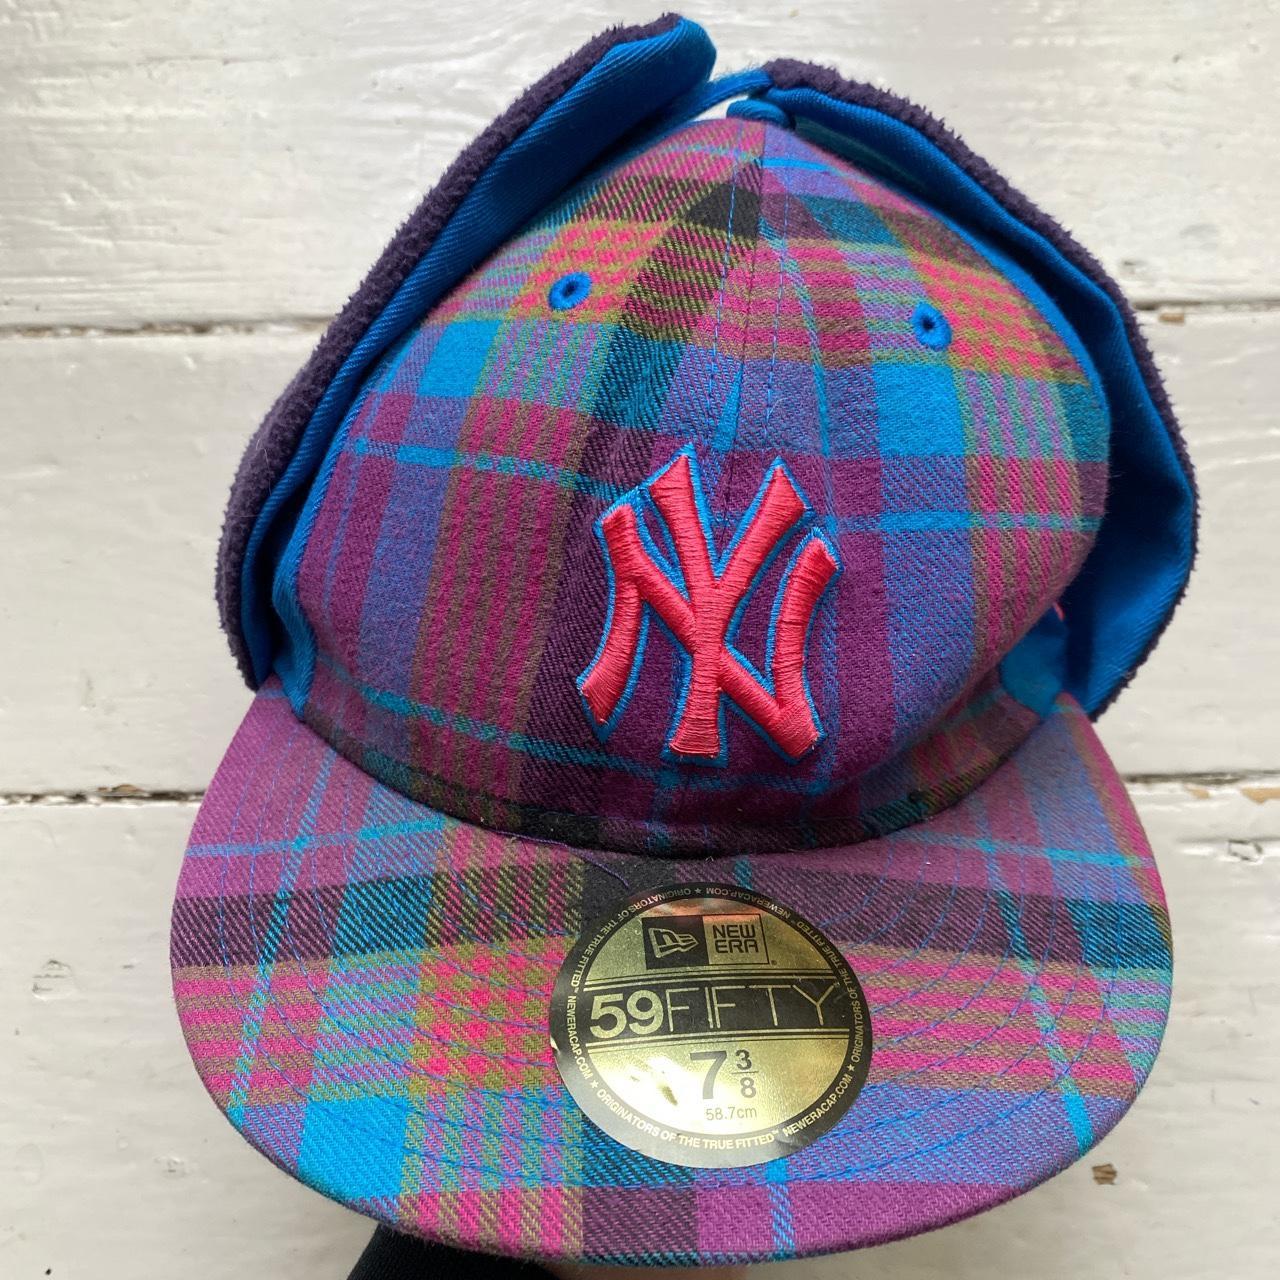 New York Yankees New Era Dog Ear Purple and Blue Checked Print Trapper Hat